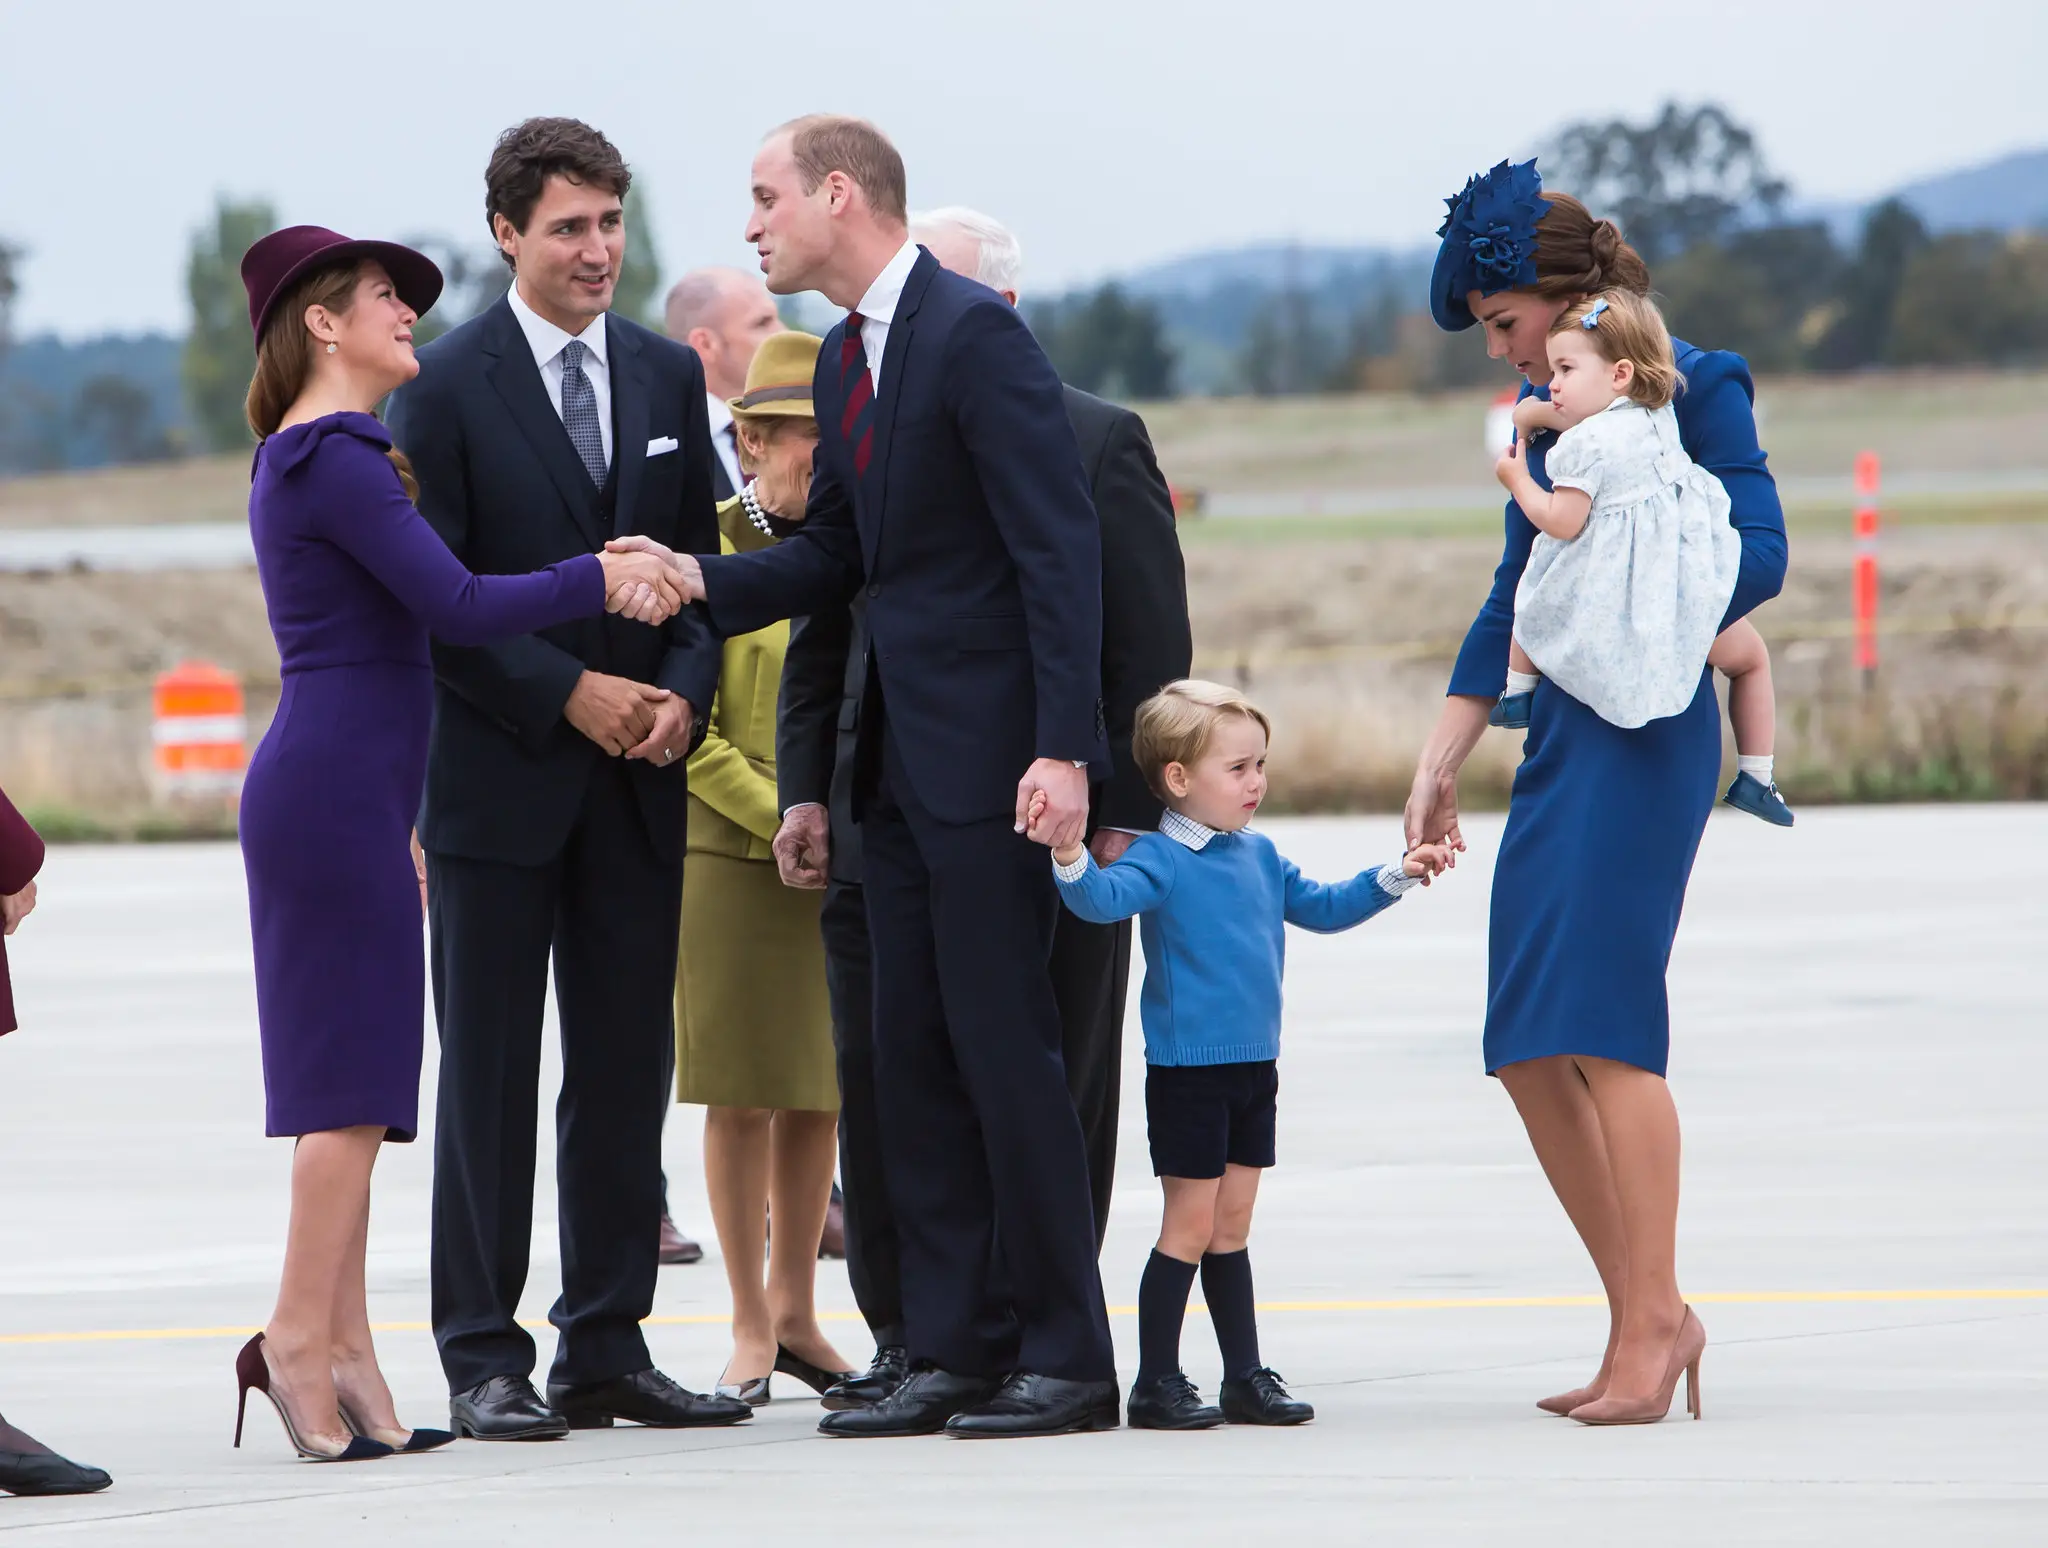 The Duke and Duchess of Cambridge arrived in Canada with Prince George and Princess Charlotte